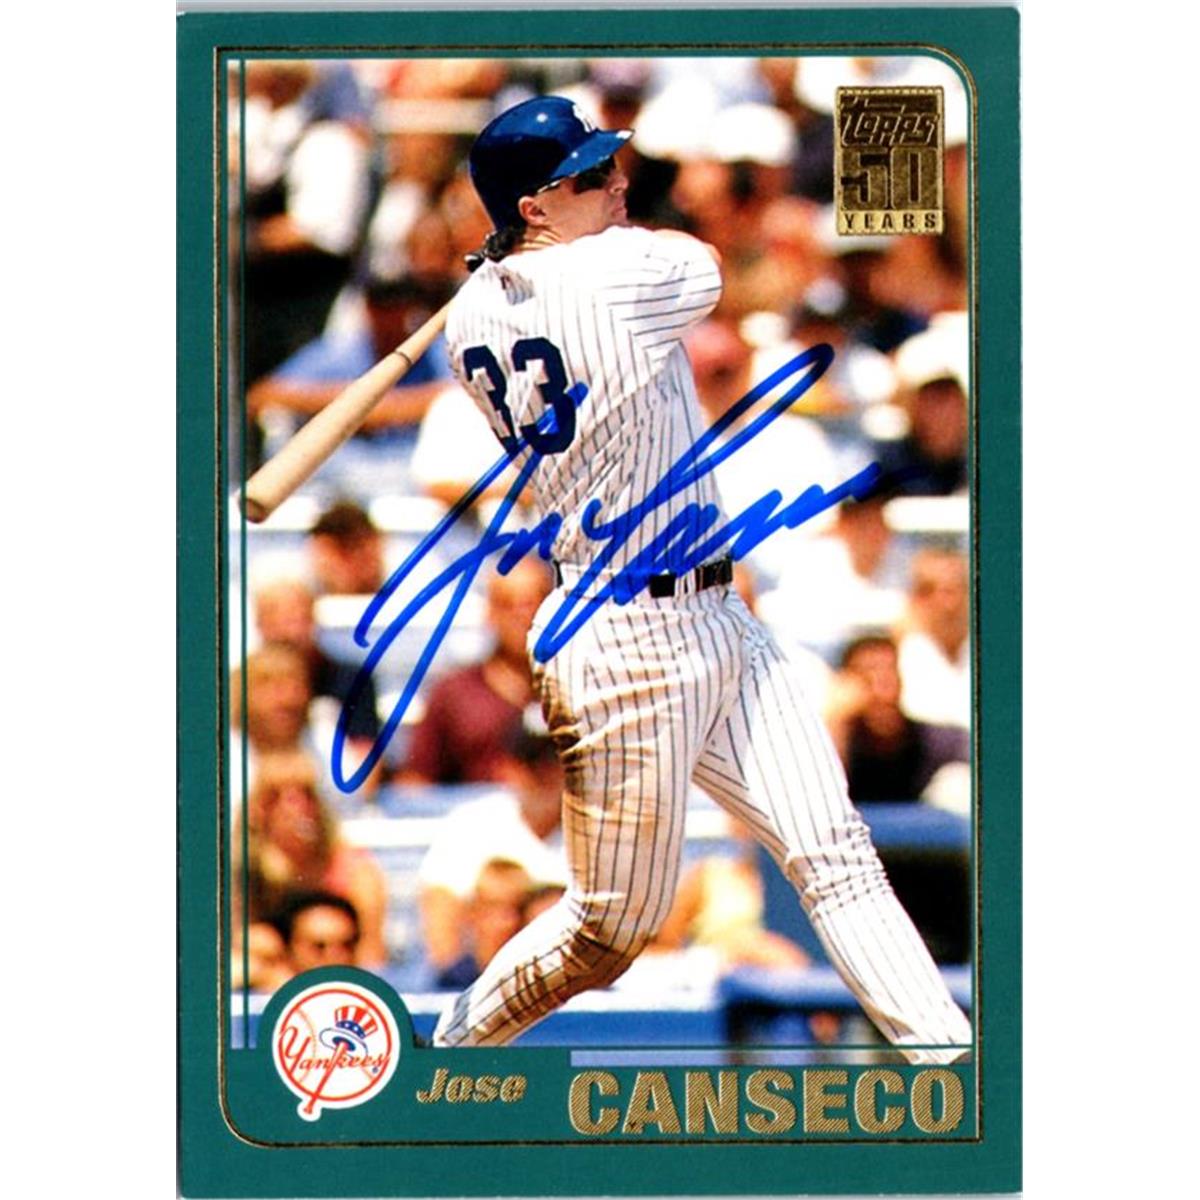 Autograph Warehouse 703258 Jose Canseco Signed New York Yankees 2001 Topps No.61 Baseball Card